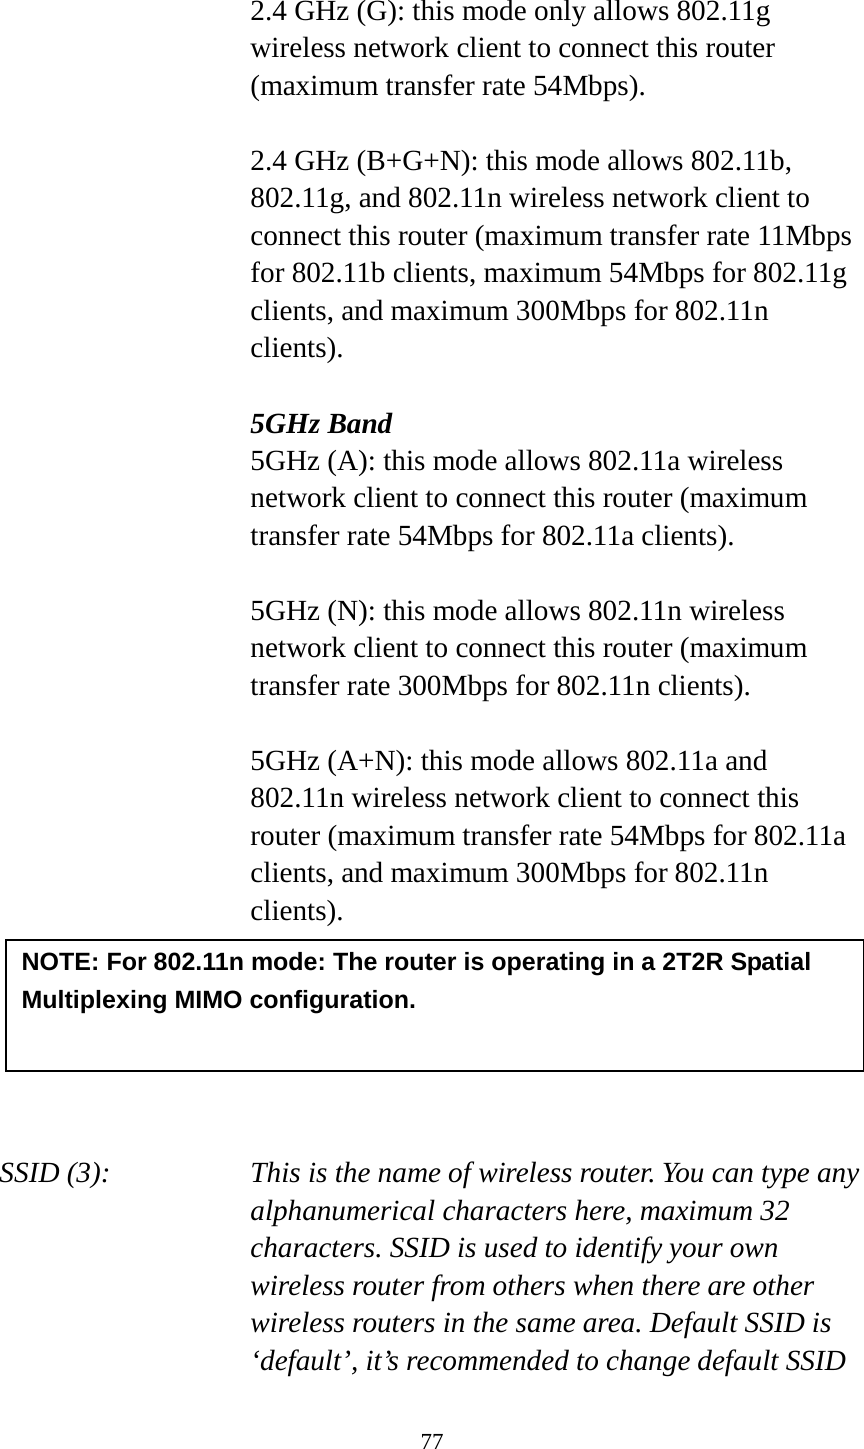 77  2.4 GHz (G): this mode only allows 802.11g wireless network client to connect this router (maximum transfer rate 54Mbps).  2.4 GHz (B+G+N): this mode allows 802.11b, 802.11g, and 802.11n wireless network client to connect this router (maximum transfer rate 11Mbps for 802.11b clients, maximum 54Mbps for 802.11g clients, and maximum 300Mbps for 802.11n clients).  5GHz Band 5GHz (A): this mode allows 802.11a wireless network client to connect this router (maximum transfer rate 54Mbps for 802.11a clients).  5GHz (N): this mode allows 802.11n wireless network client to connect this router (maximum transfer rate 300Mbps for 802.11n clients).  5GHz (A+N): this mode allows 802.11a and 802.11n wireless network client to connect this router (maximum transfer rate 54Mbps for 802.11a clients, and maximum 300Mbps for 802.11n clients).       SSID (3):   This is the name of wireless router. You can type any alphanumerical characters here, maximum 32 characters. SSID is used to identify your own wireless router from others when there are other wireless routers in the same area. Default SSID is ‘default’, it’s recommended to change default SSID NOTE: For 802.11n mode: The router is operating in a 2T2R Spatial Multiplexing MIMO configuration.    